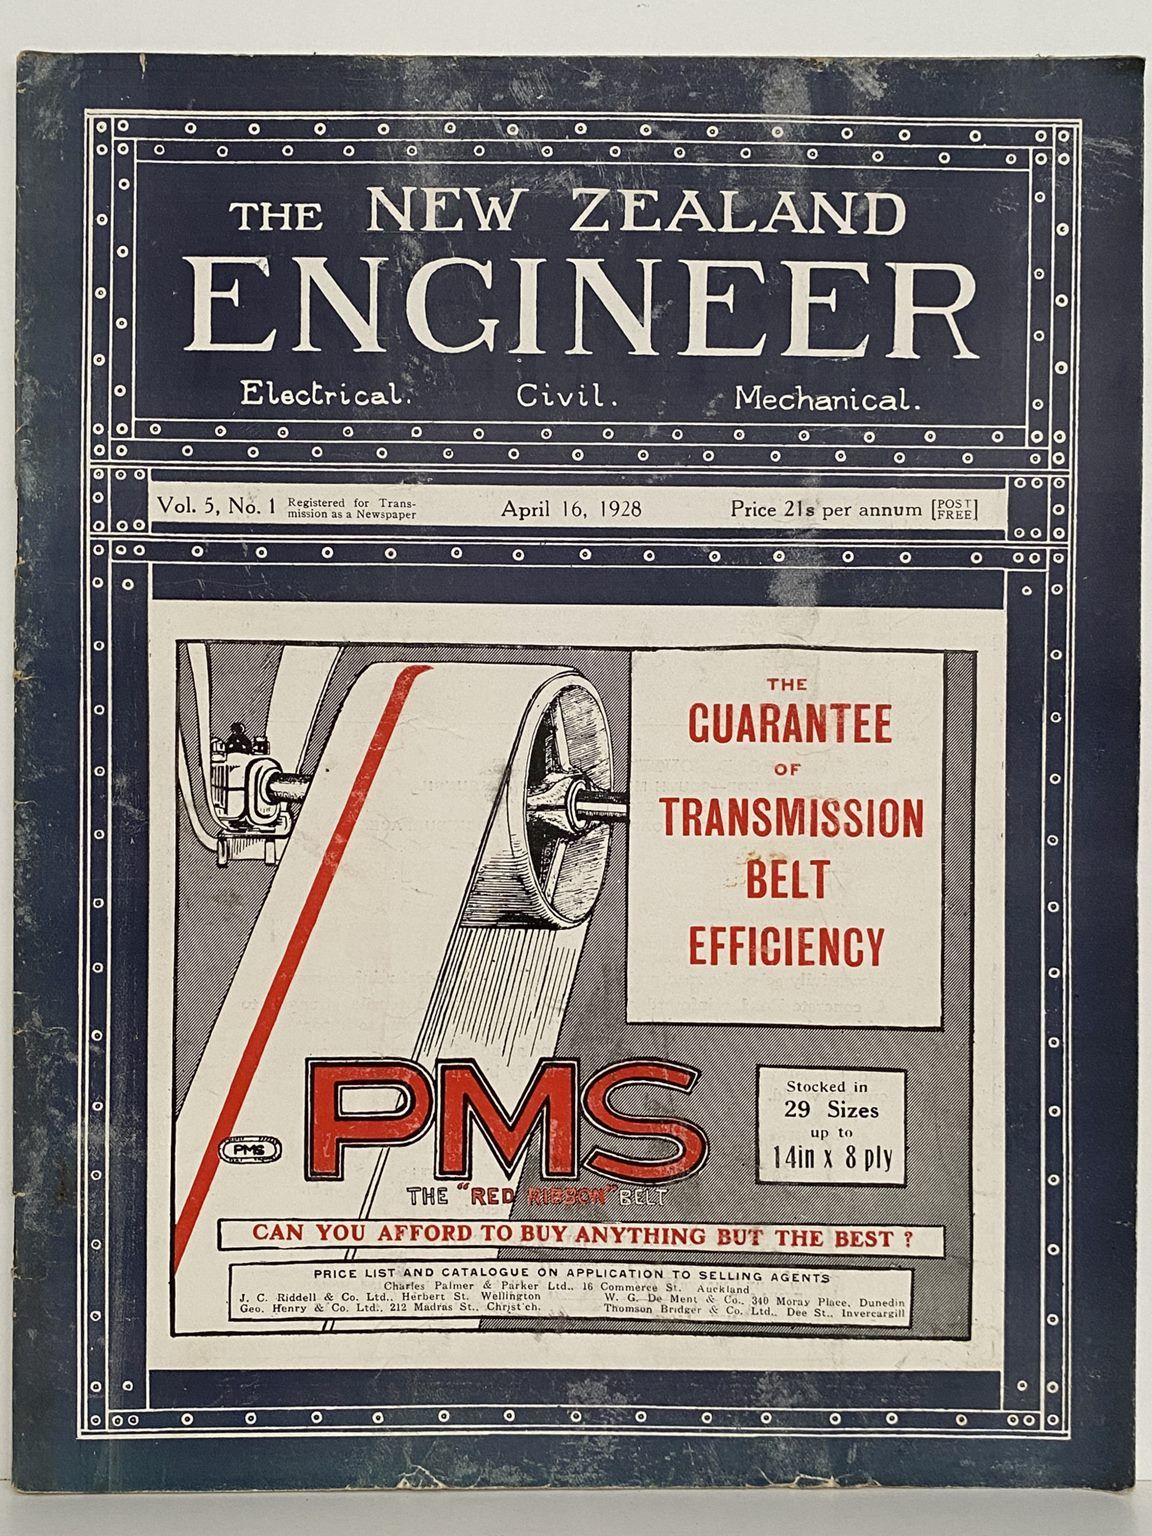 OLD MAGAZINE: The New Zealand Engineer Vol. 5, No. 1 - 16 April 1928